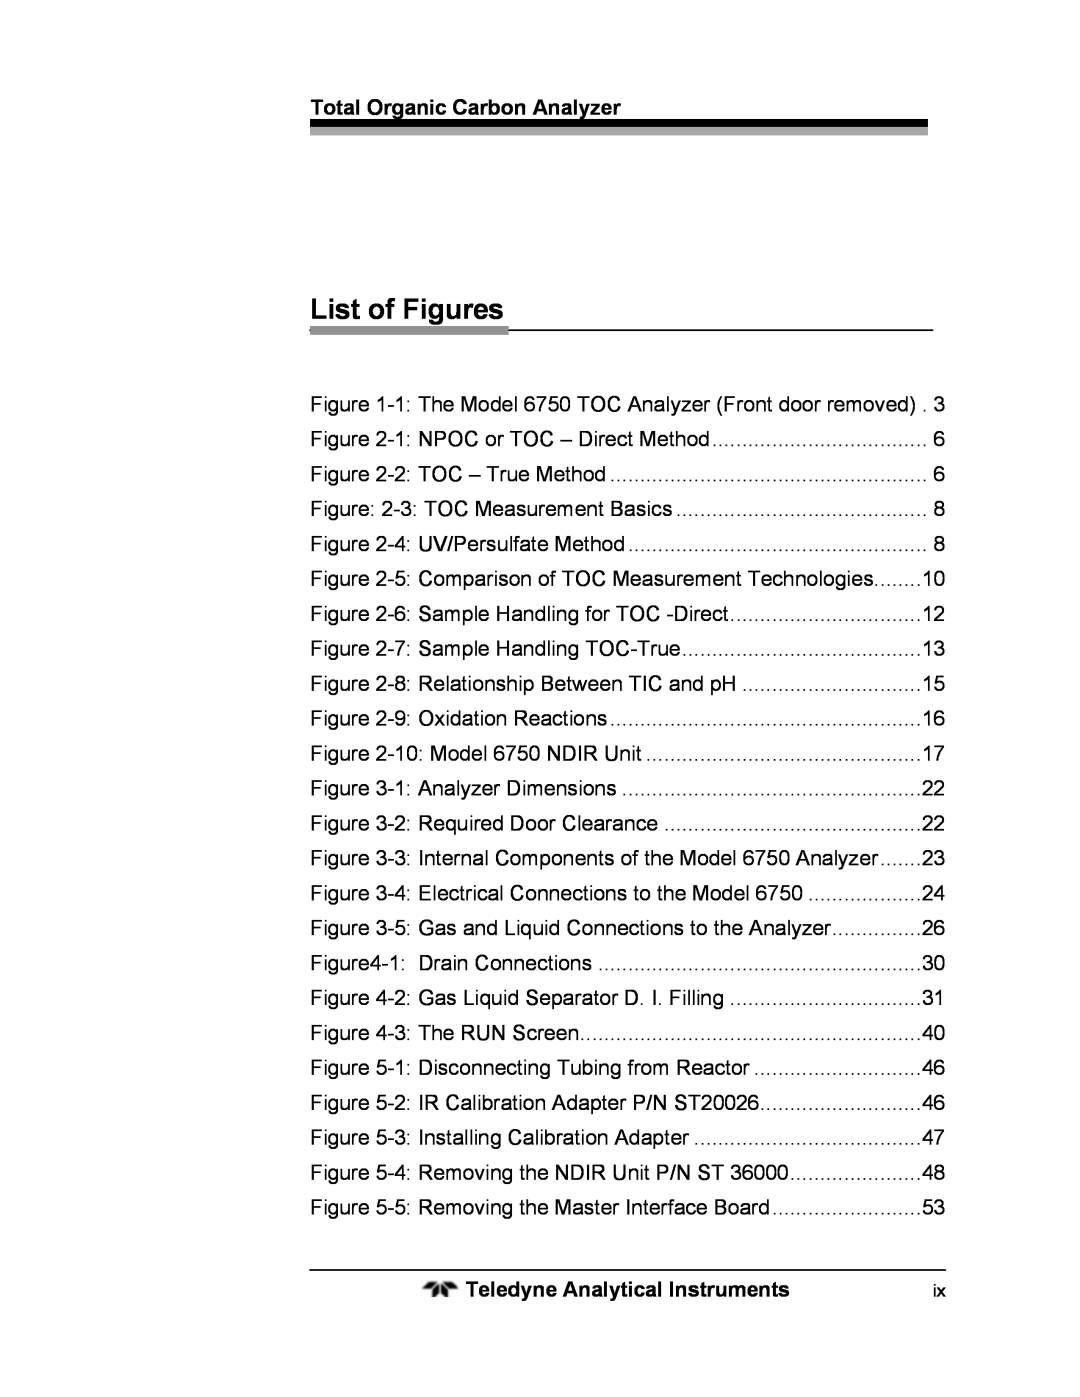 Teledyne 6750 operating instructions List of Figures 